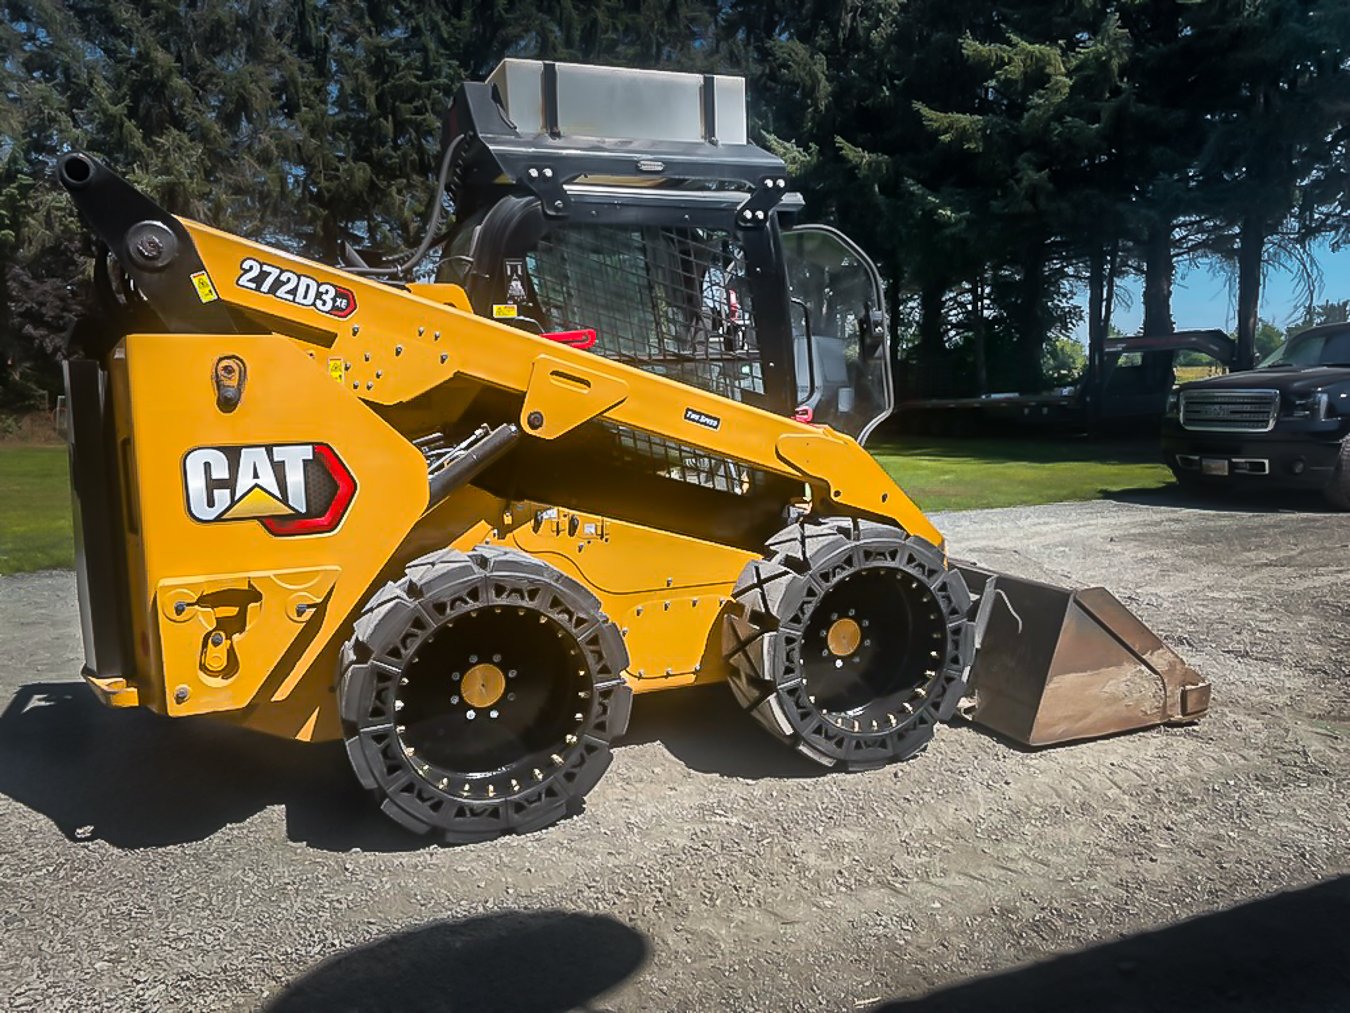 This image shows the EWRS HS Bobcat solid tires installed on a CAT 272D3 HS